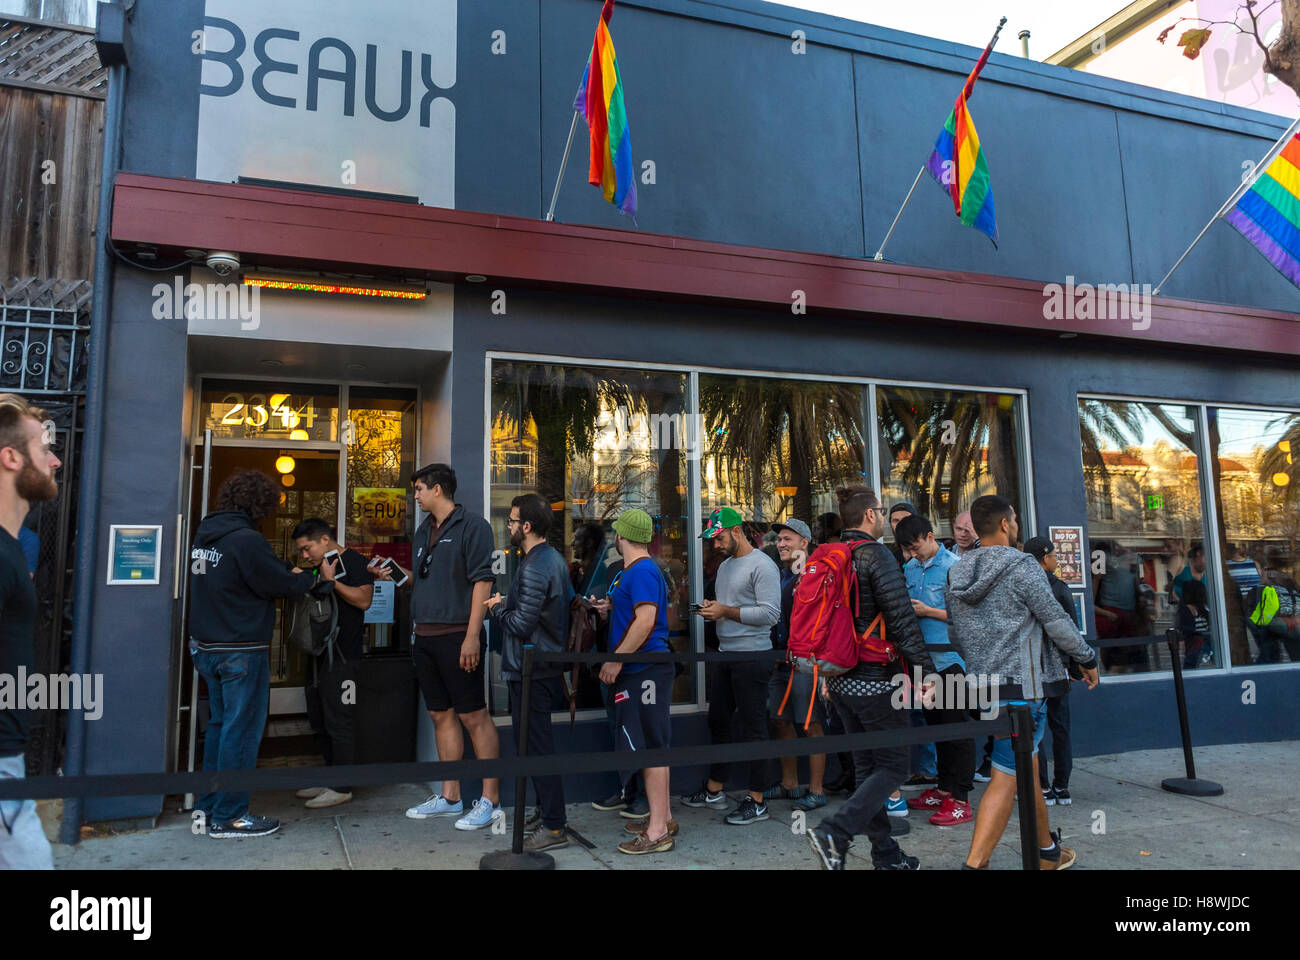 San Francisco, CA, USA, Crowd of Gay Men Waiting online to go in local gay bar, the Beaux  the Castro, Front Stock Photo